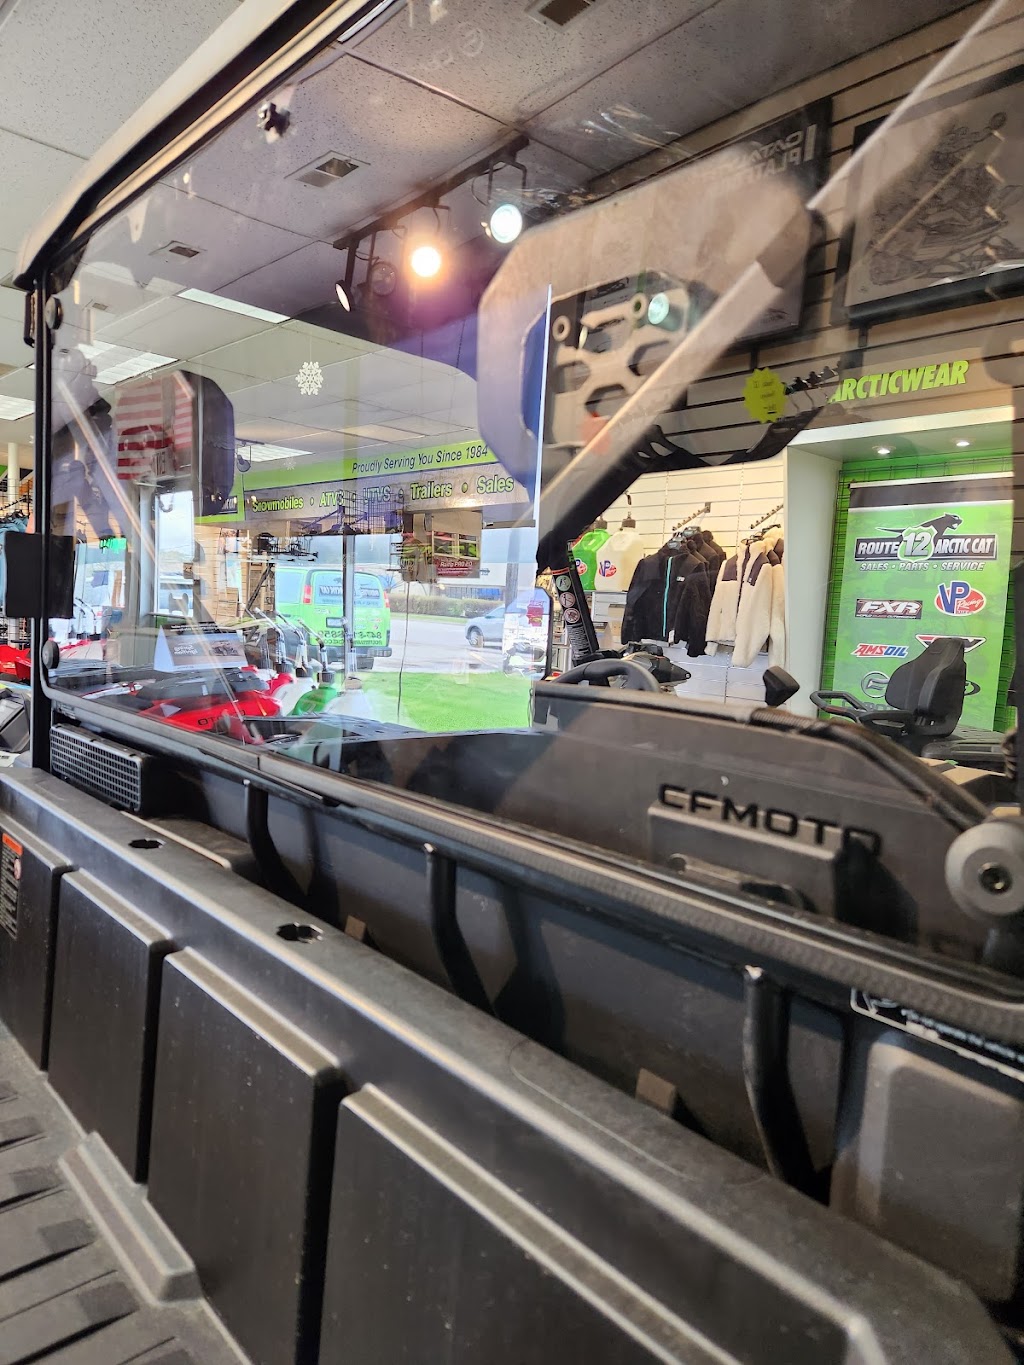 Route 12 Arctic Cat | 1320 E Rand Rd, Arlington Heights, IL 60004 | Phone: (847) 818-8849